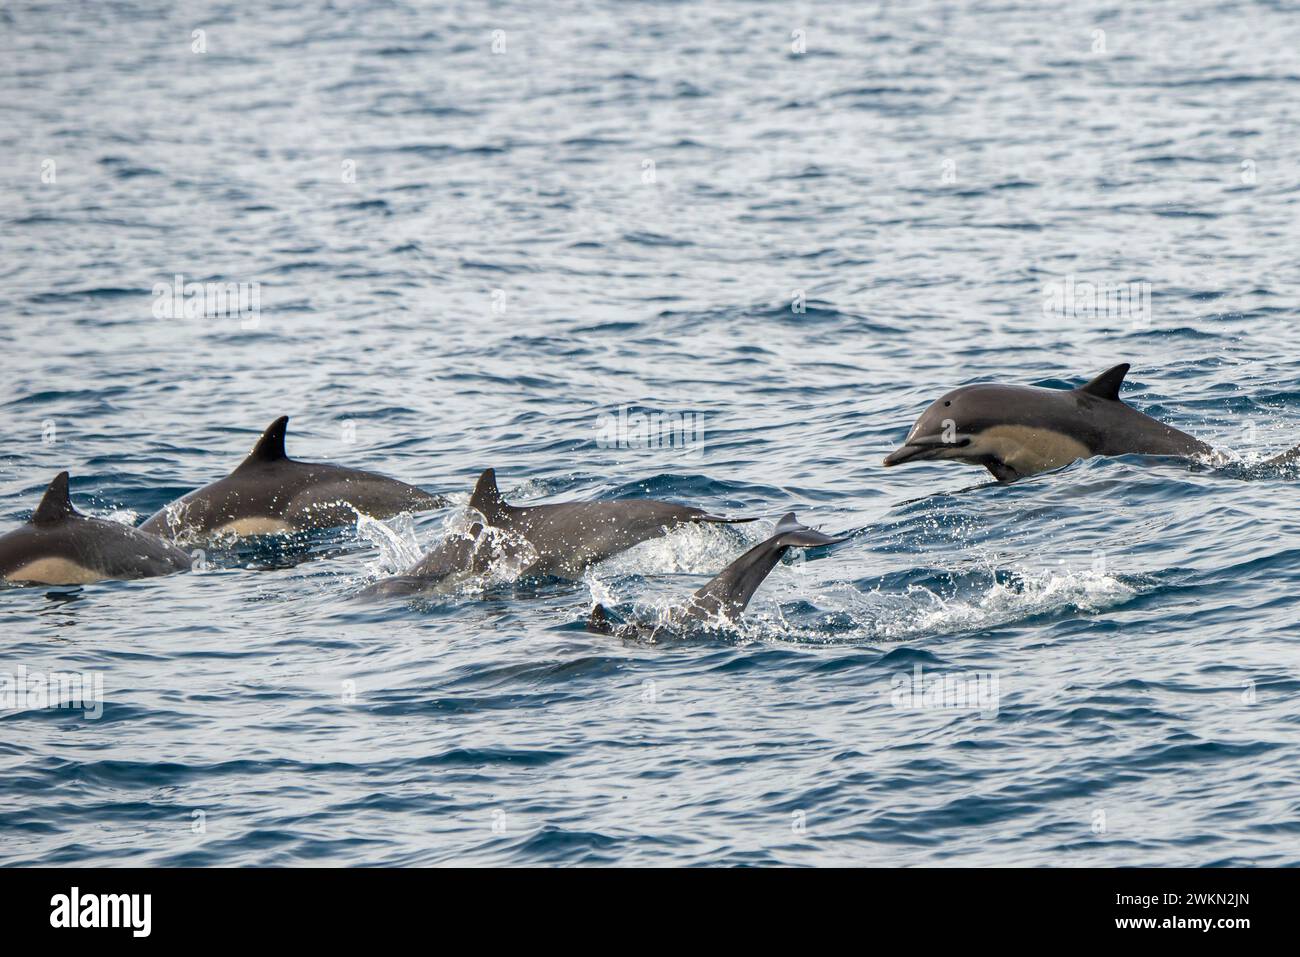 Dana Point, California. A group of Short-beaked common dolphins, Delphinus delphis swimming in the Pacific ocean Stock Photo